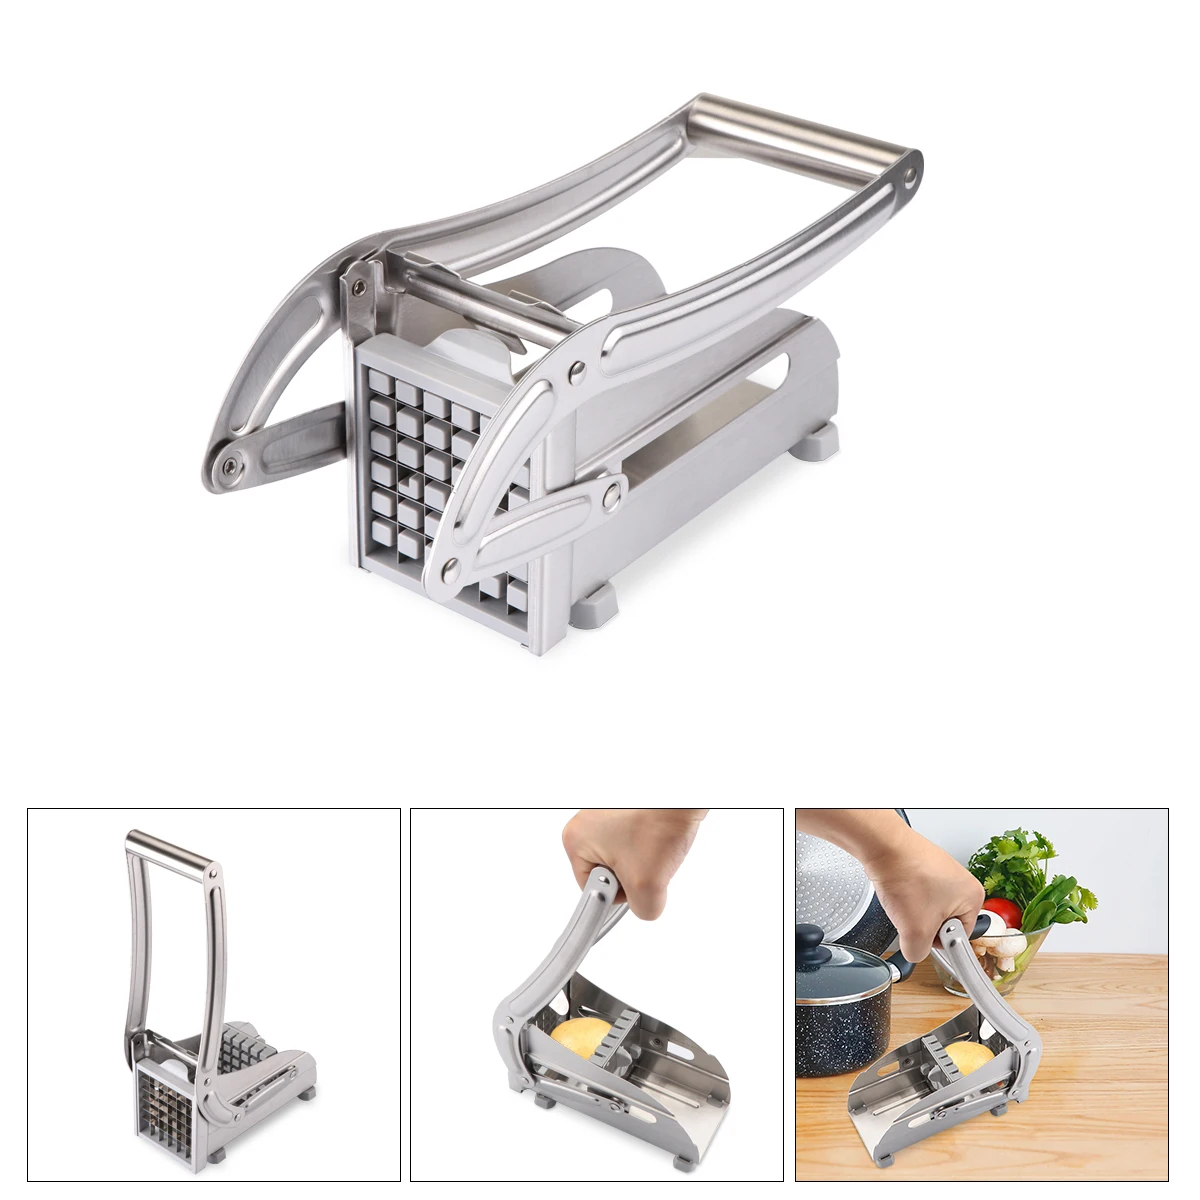 Cutting Machine Cutting French Fries Best Value Stainless Steel Does Not Use Home Potato Slicer Cucumber